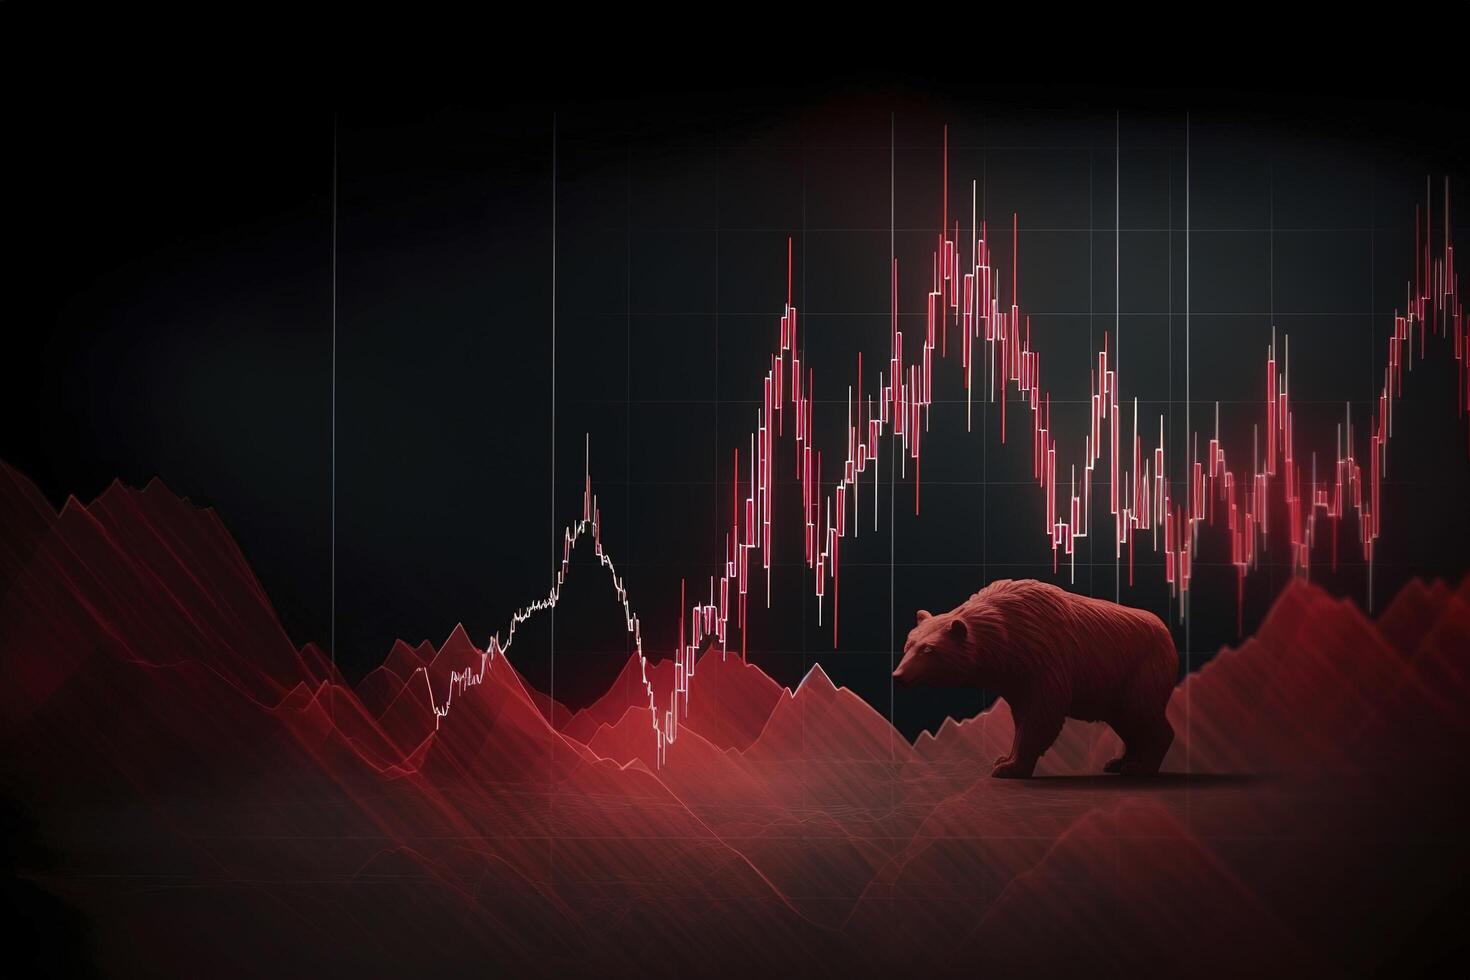 stock bear market red Downward trend charts on the investment trading pessimistic expectations, . photo